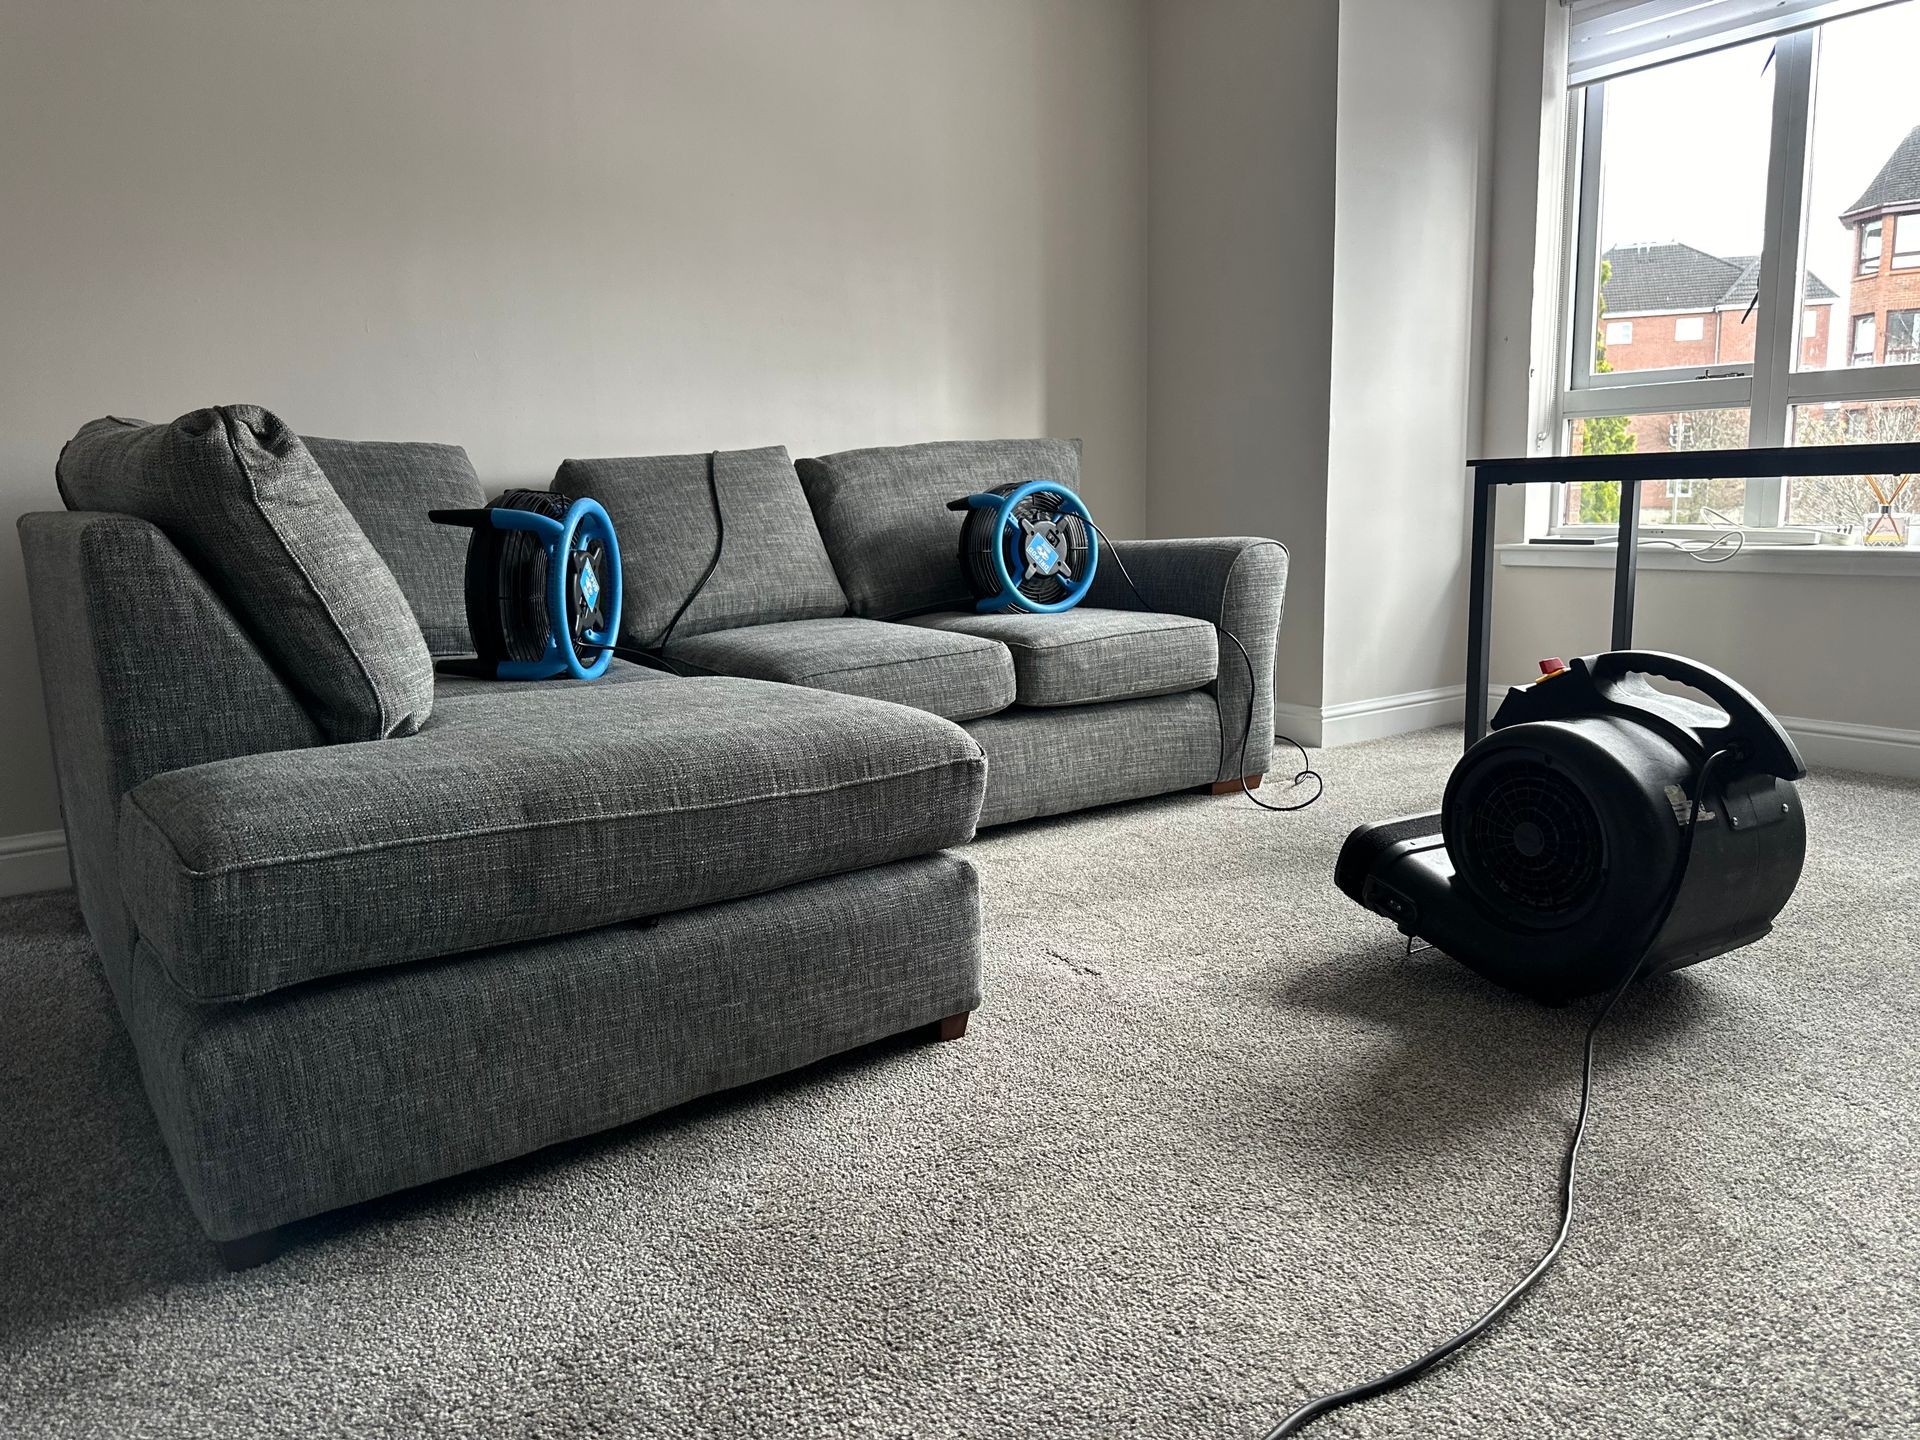 Upholstery, sofa, couch cleaning Glasgow sofa cleaner near me 